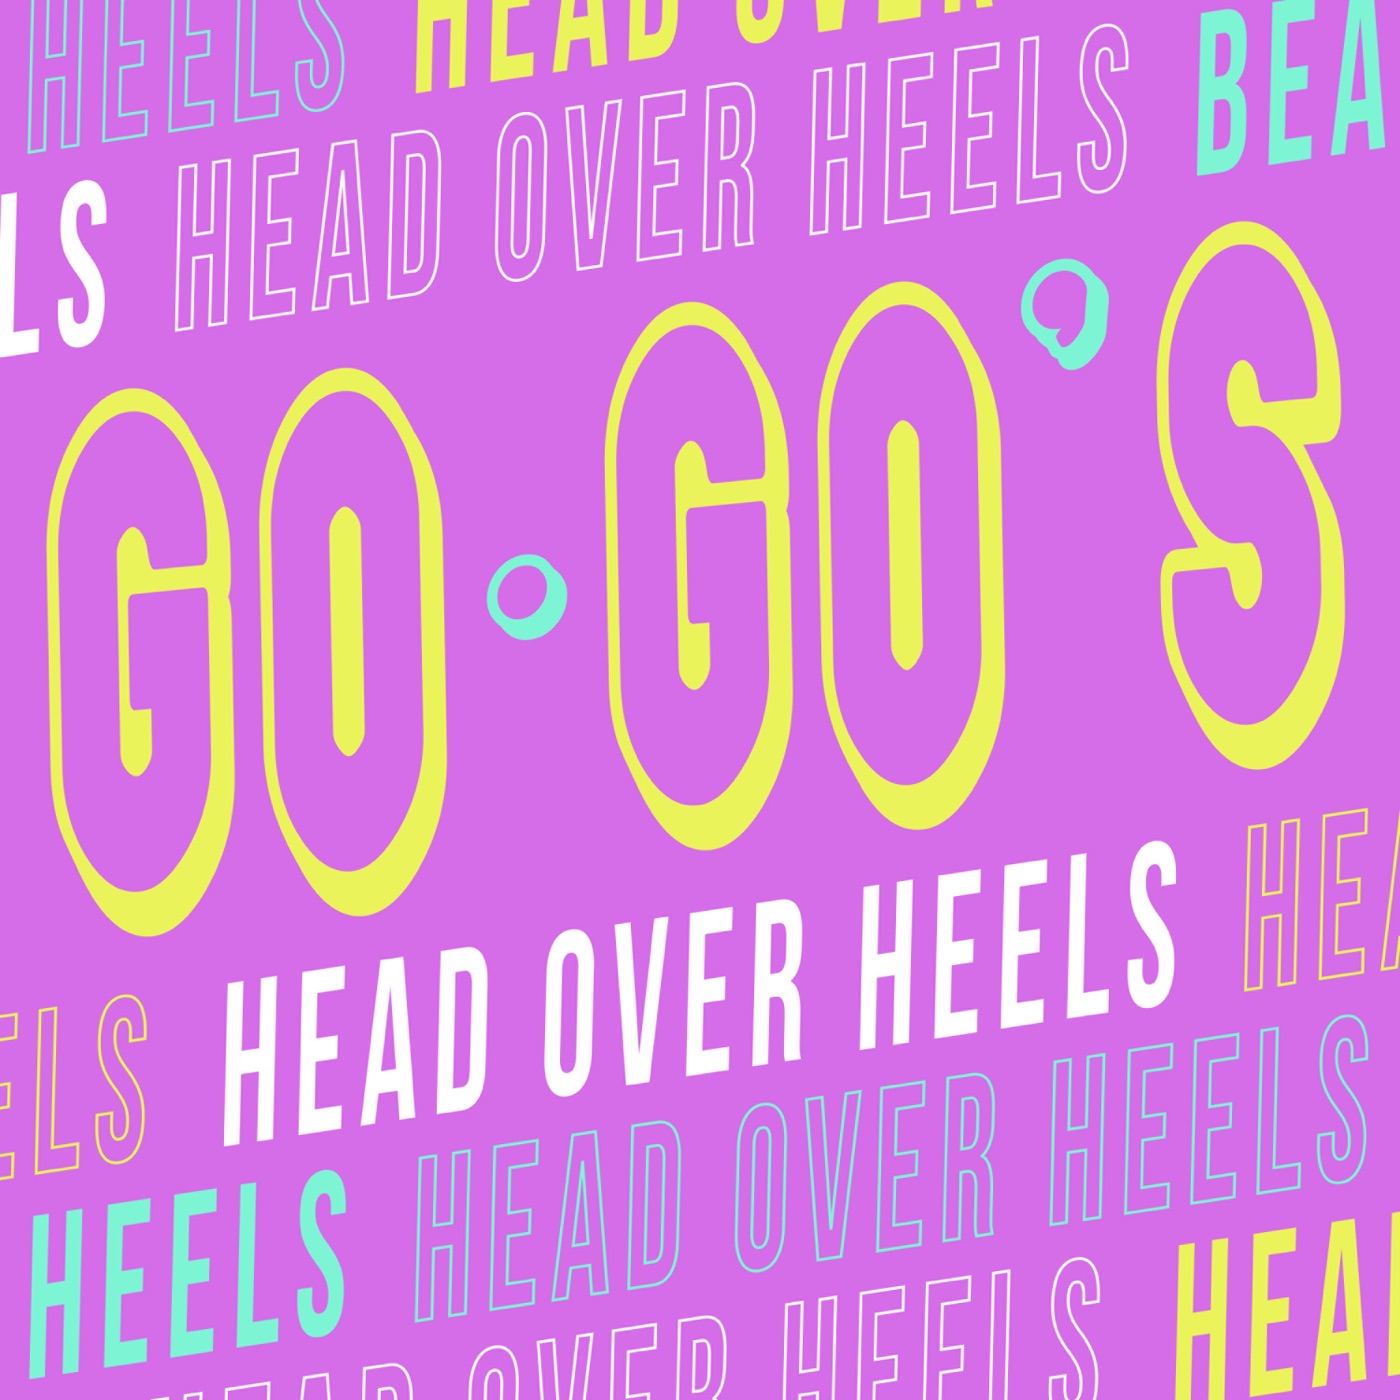 Head Over Heels by The Go-Go's